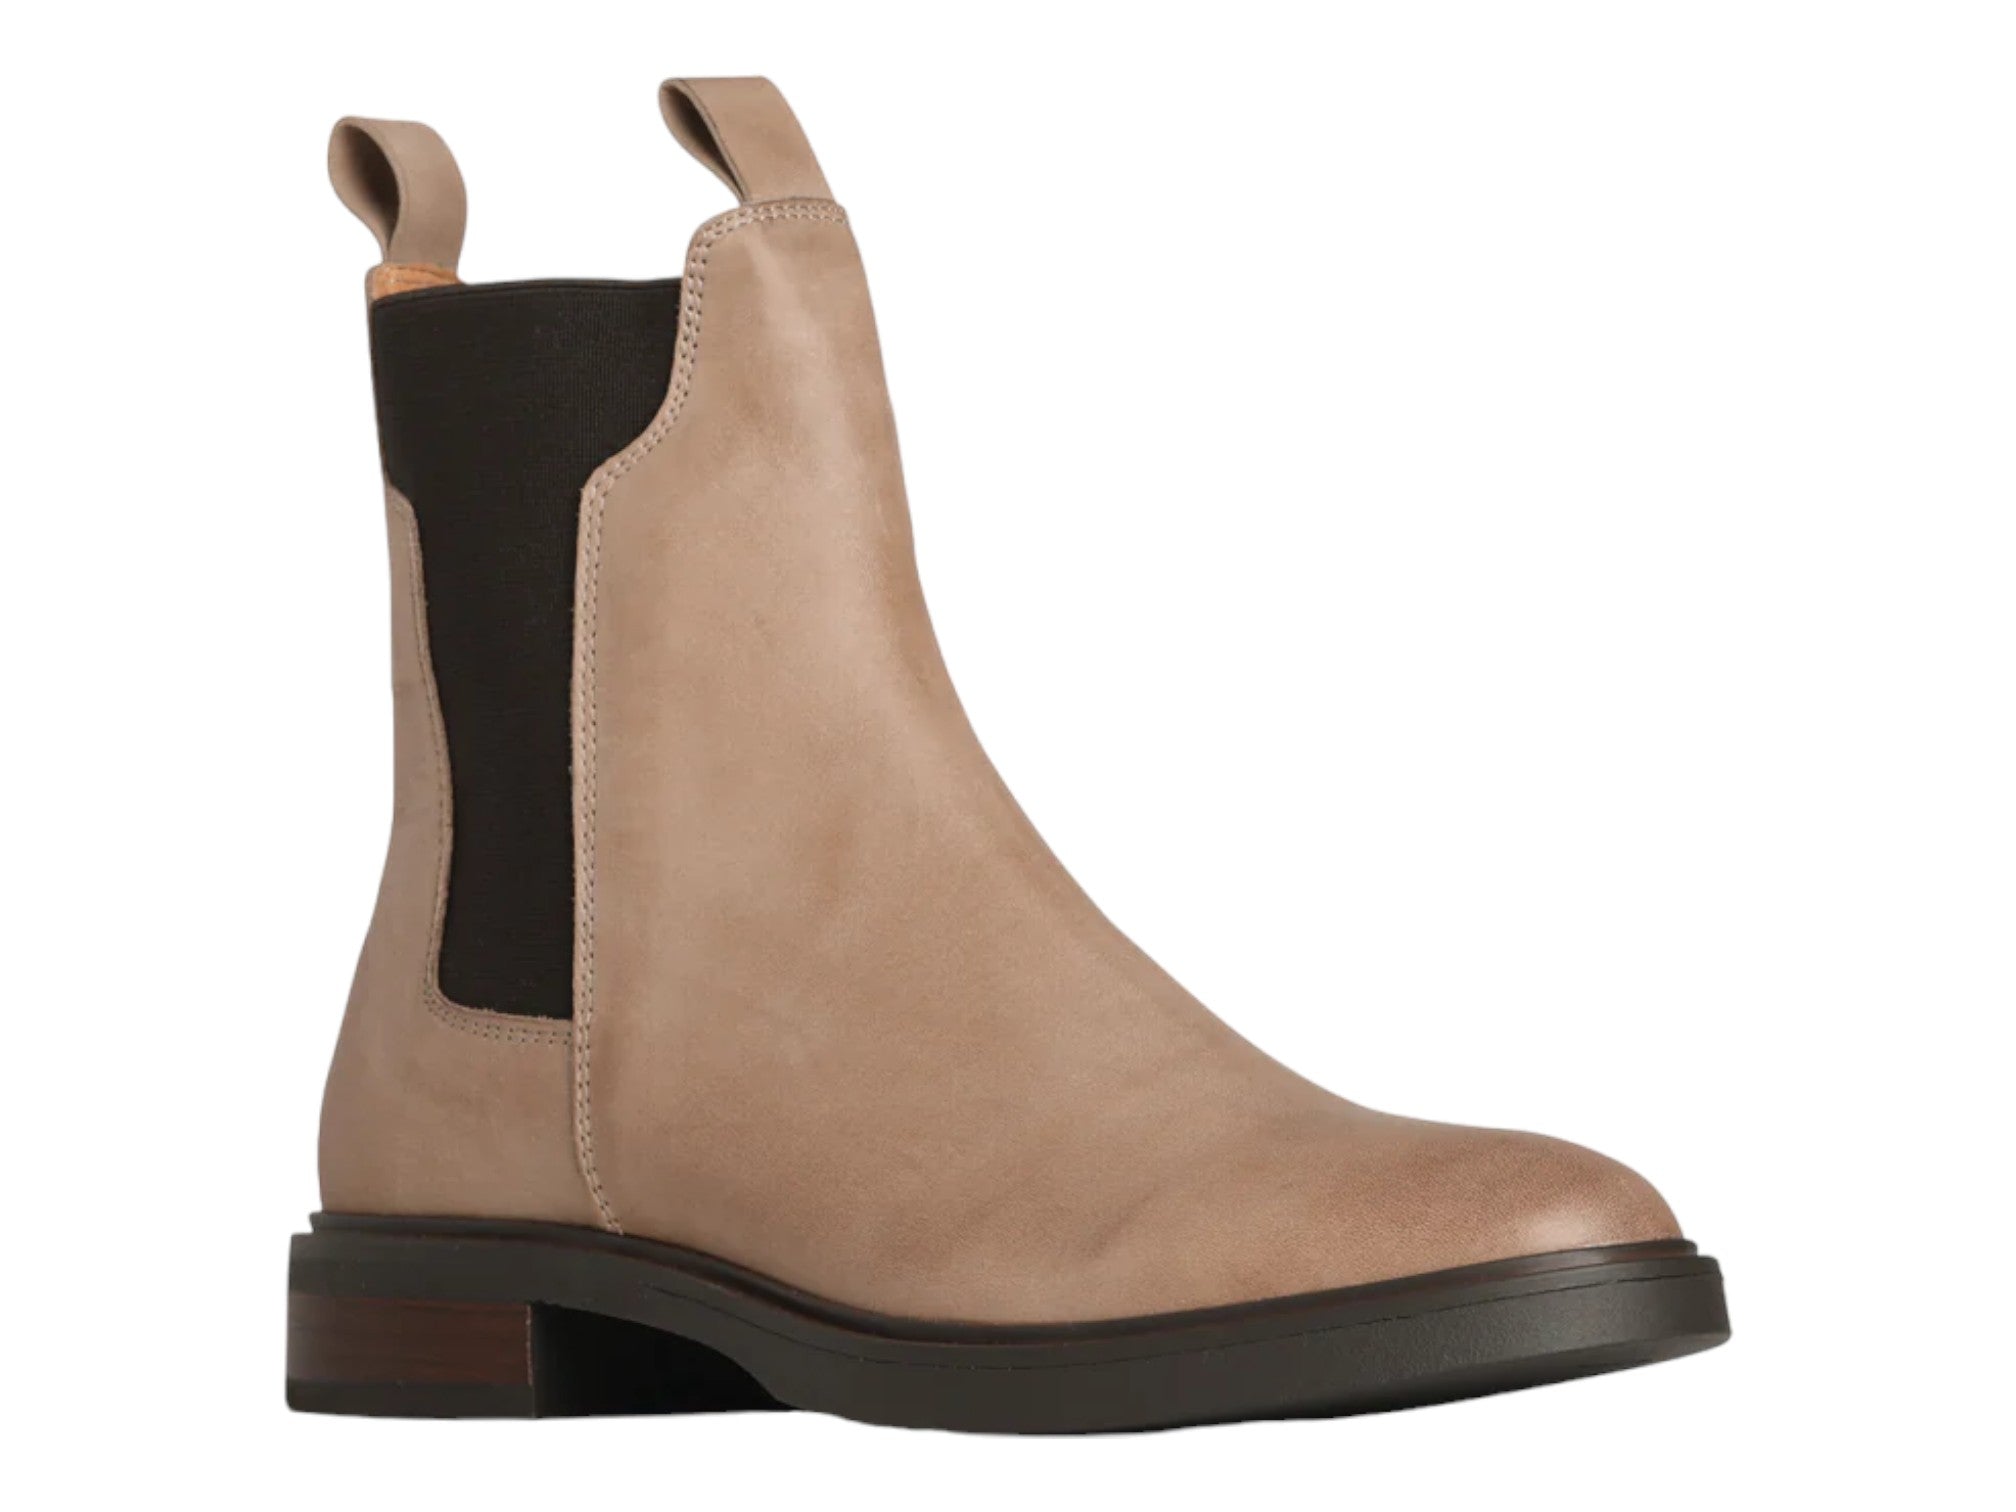 Eos Blaire Ankle Boot - Women's